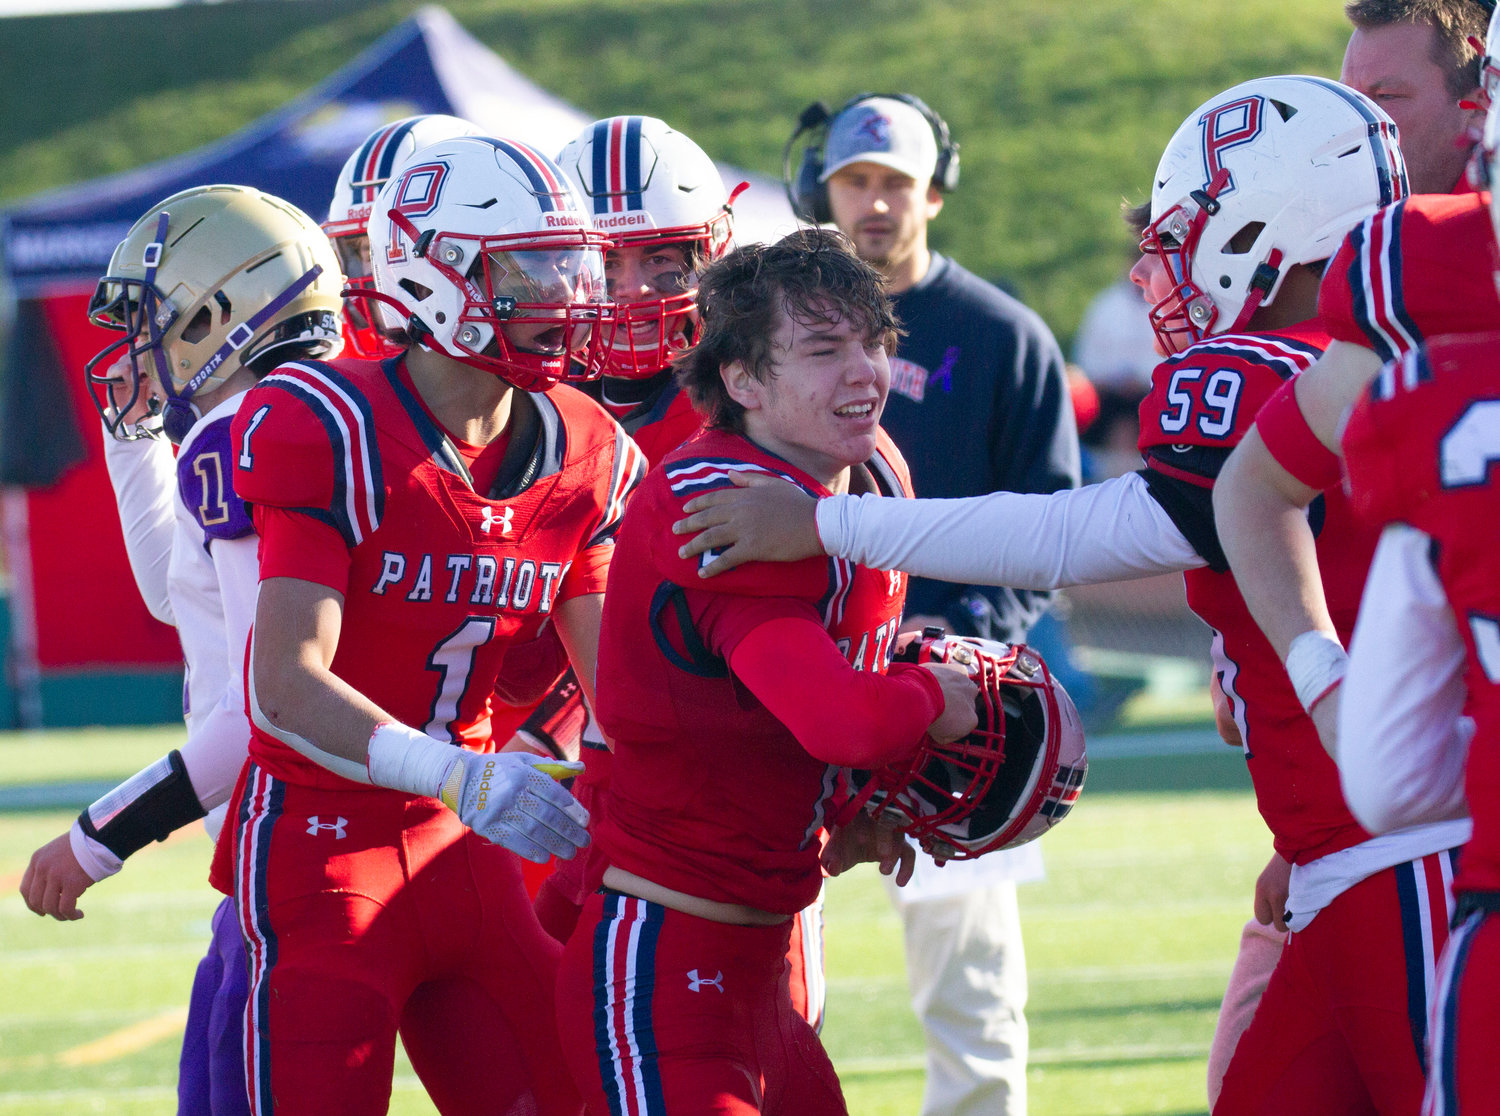 Carson Conheeny (No. 1), Trey Delemos (No. 59) and others congratulate Tyler Hurd (middle) after he made an impressive fourth quarter pass interception.